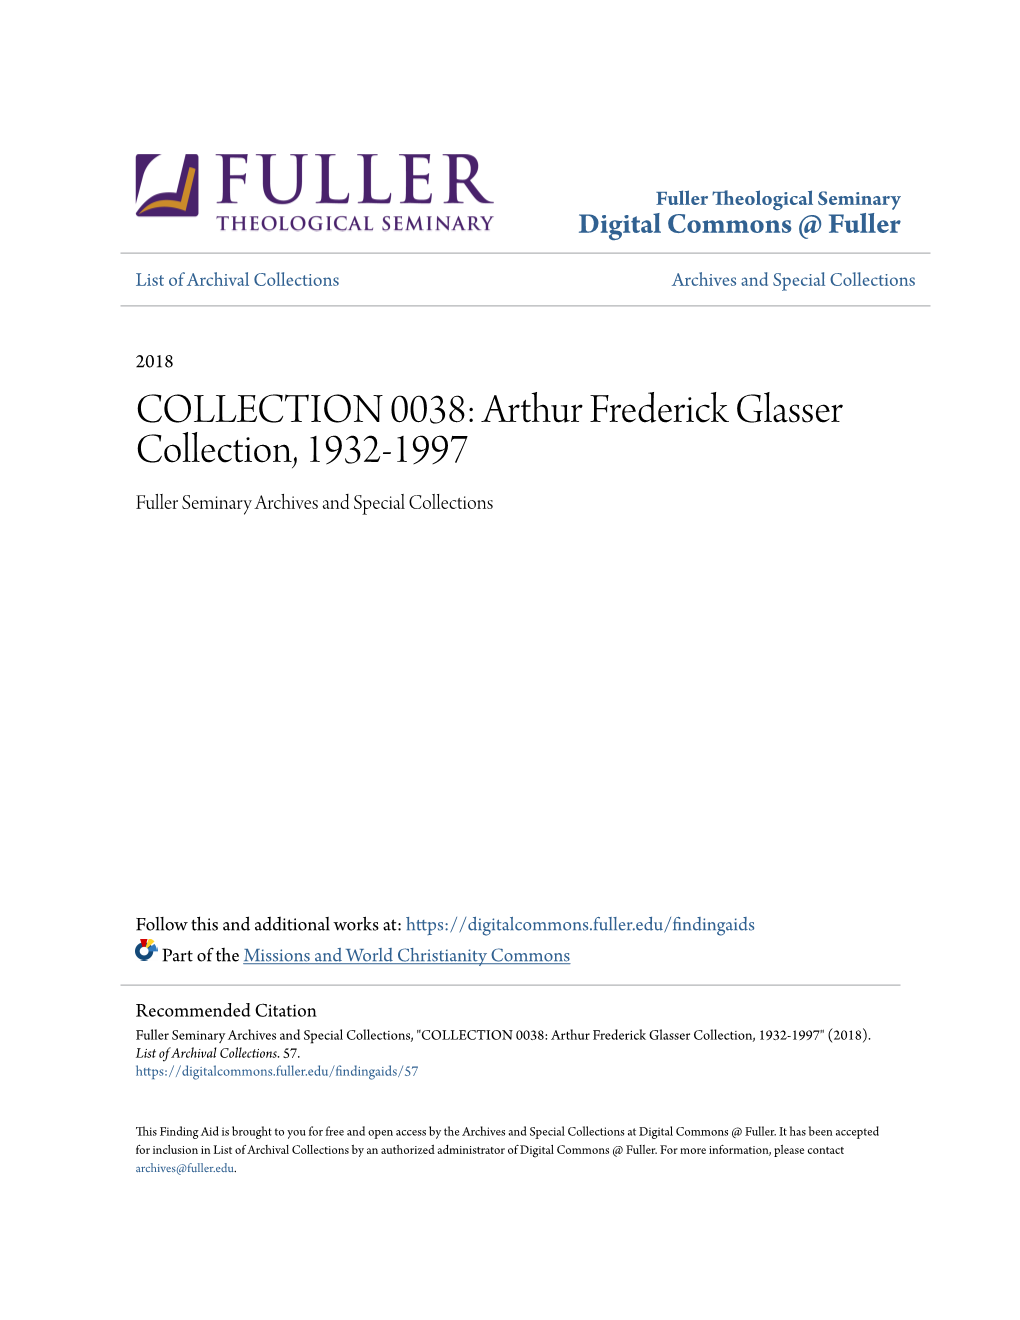 Arthur Frederick Glasser Collection, 1932-1997 Fuller Seminary Archives and Special Collections